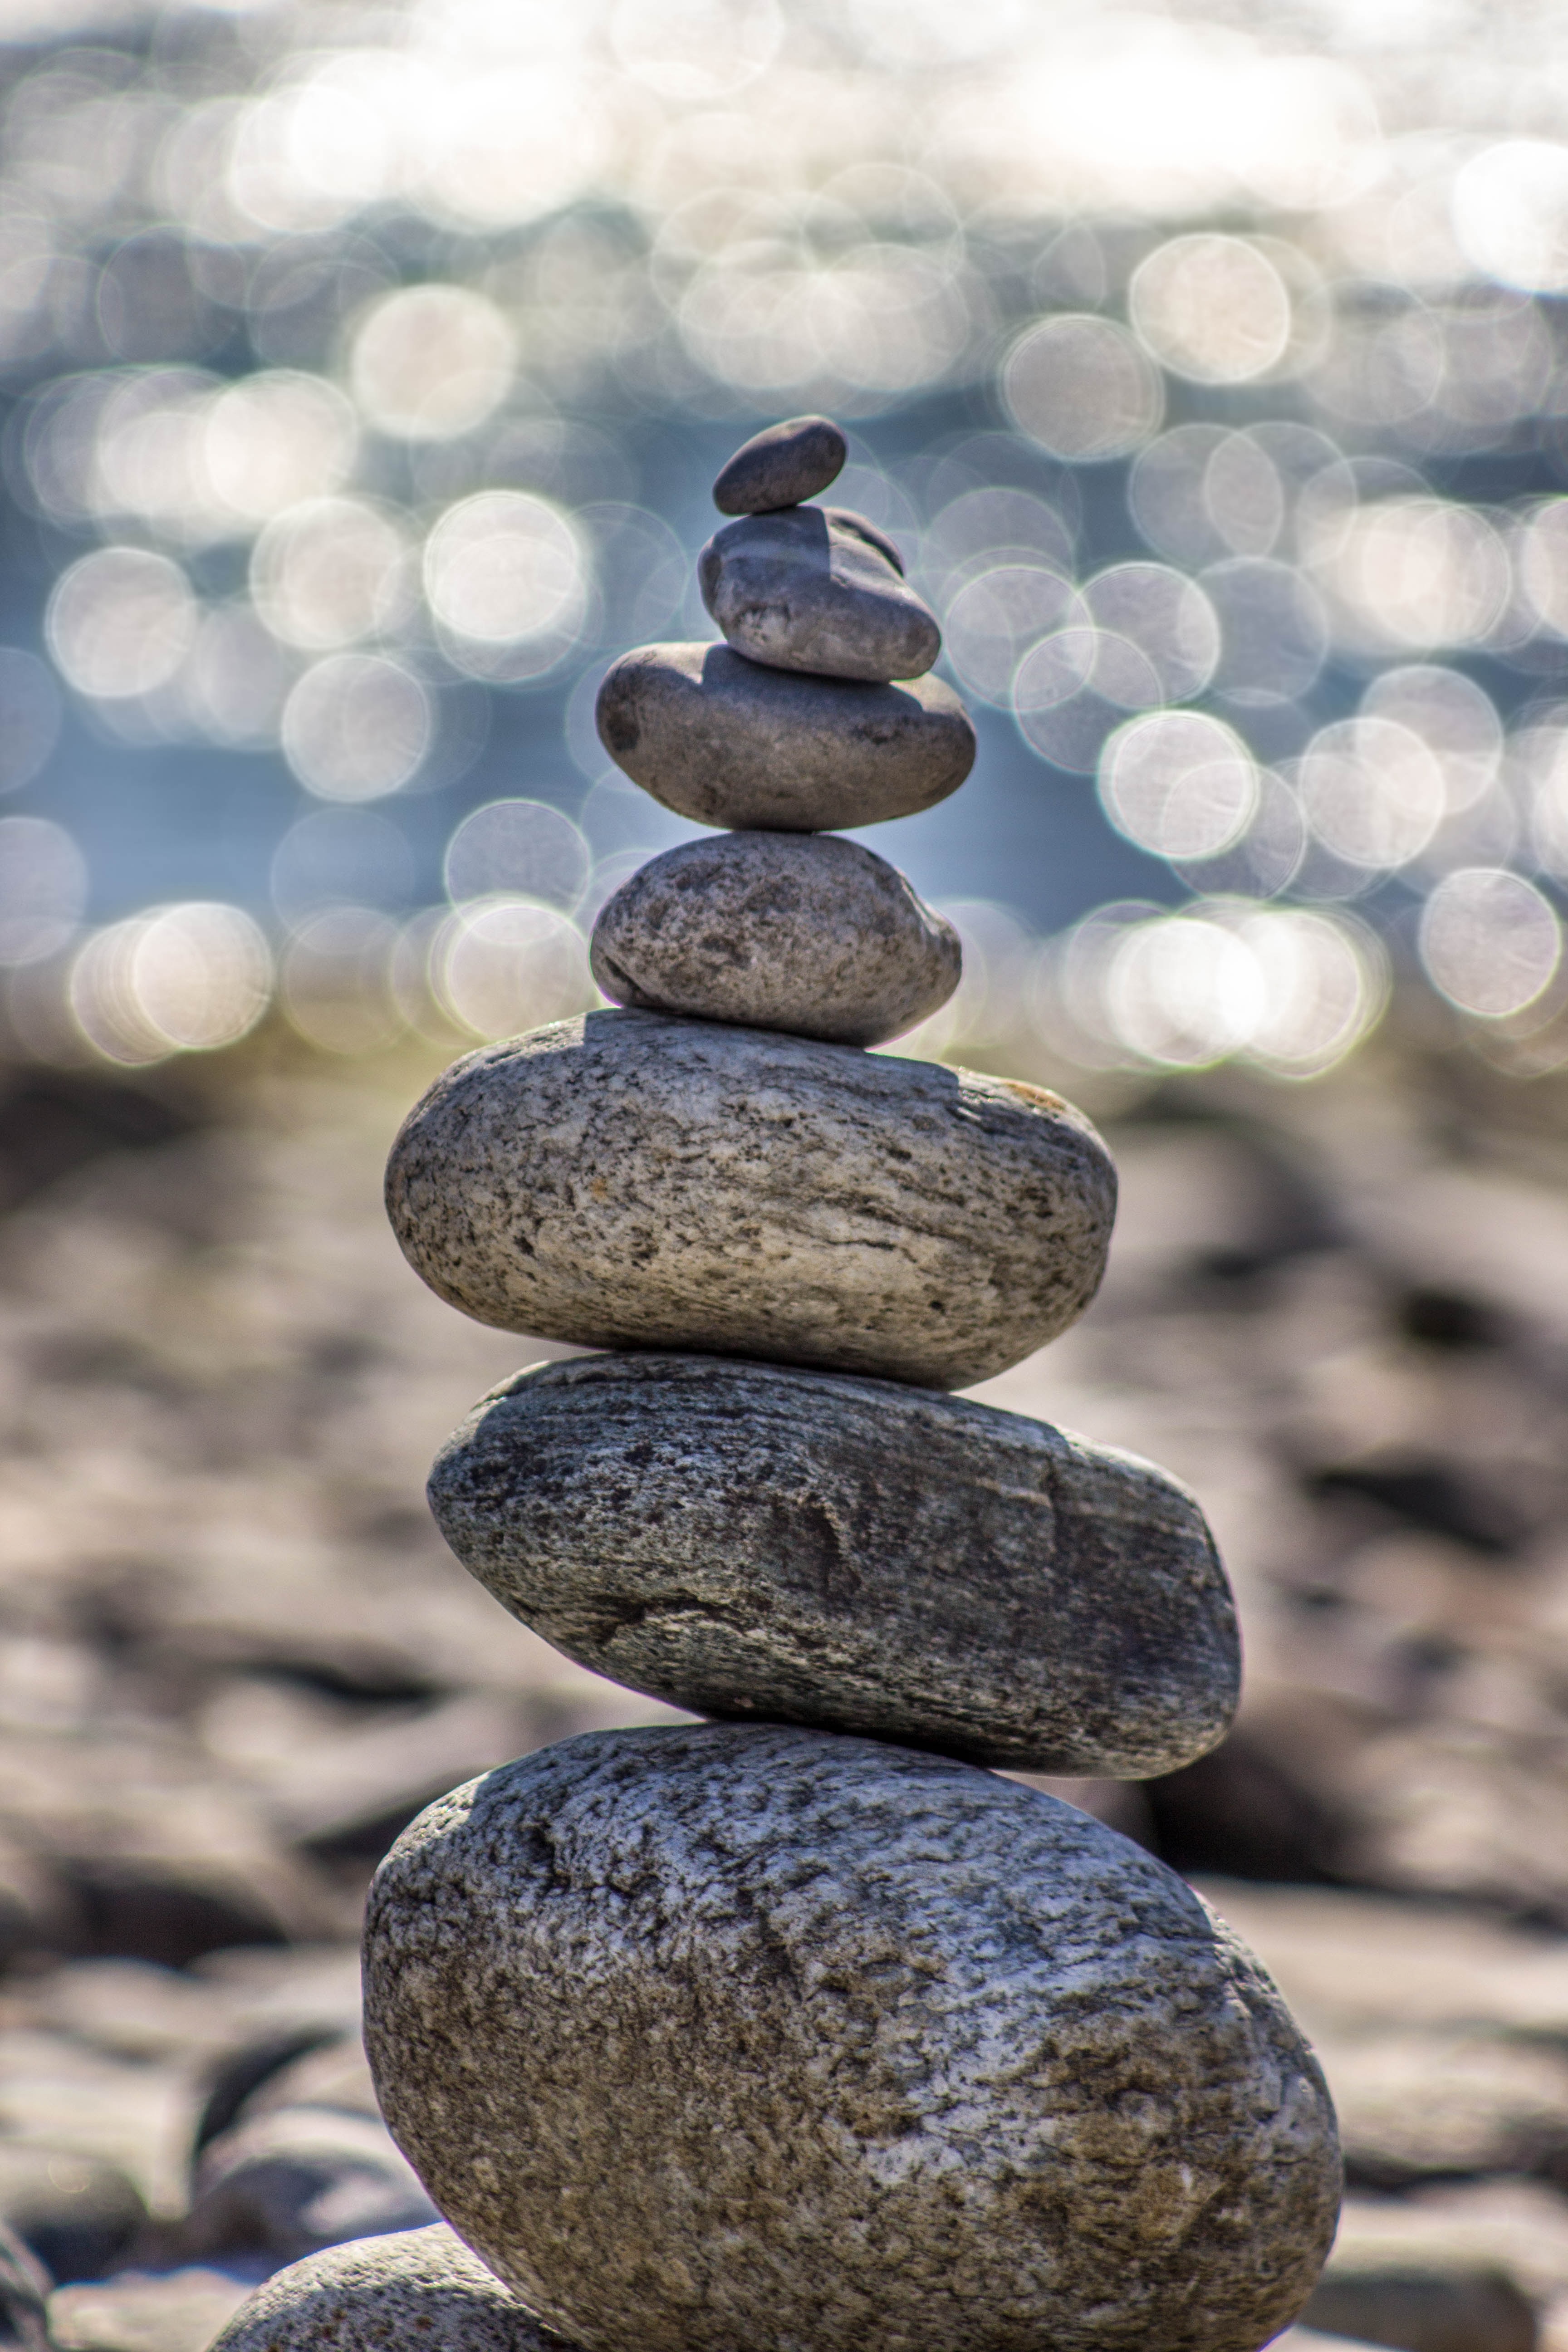 rocks carefully stacked on top of each other in a pyramidal shape with a blurred background that suggests water droplets